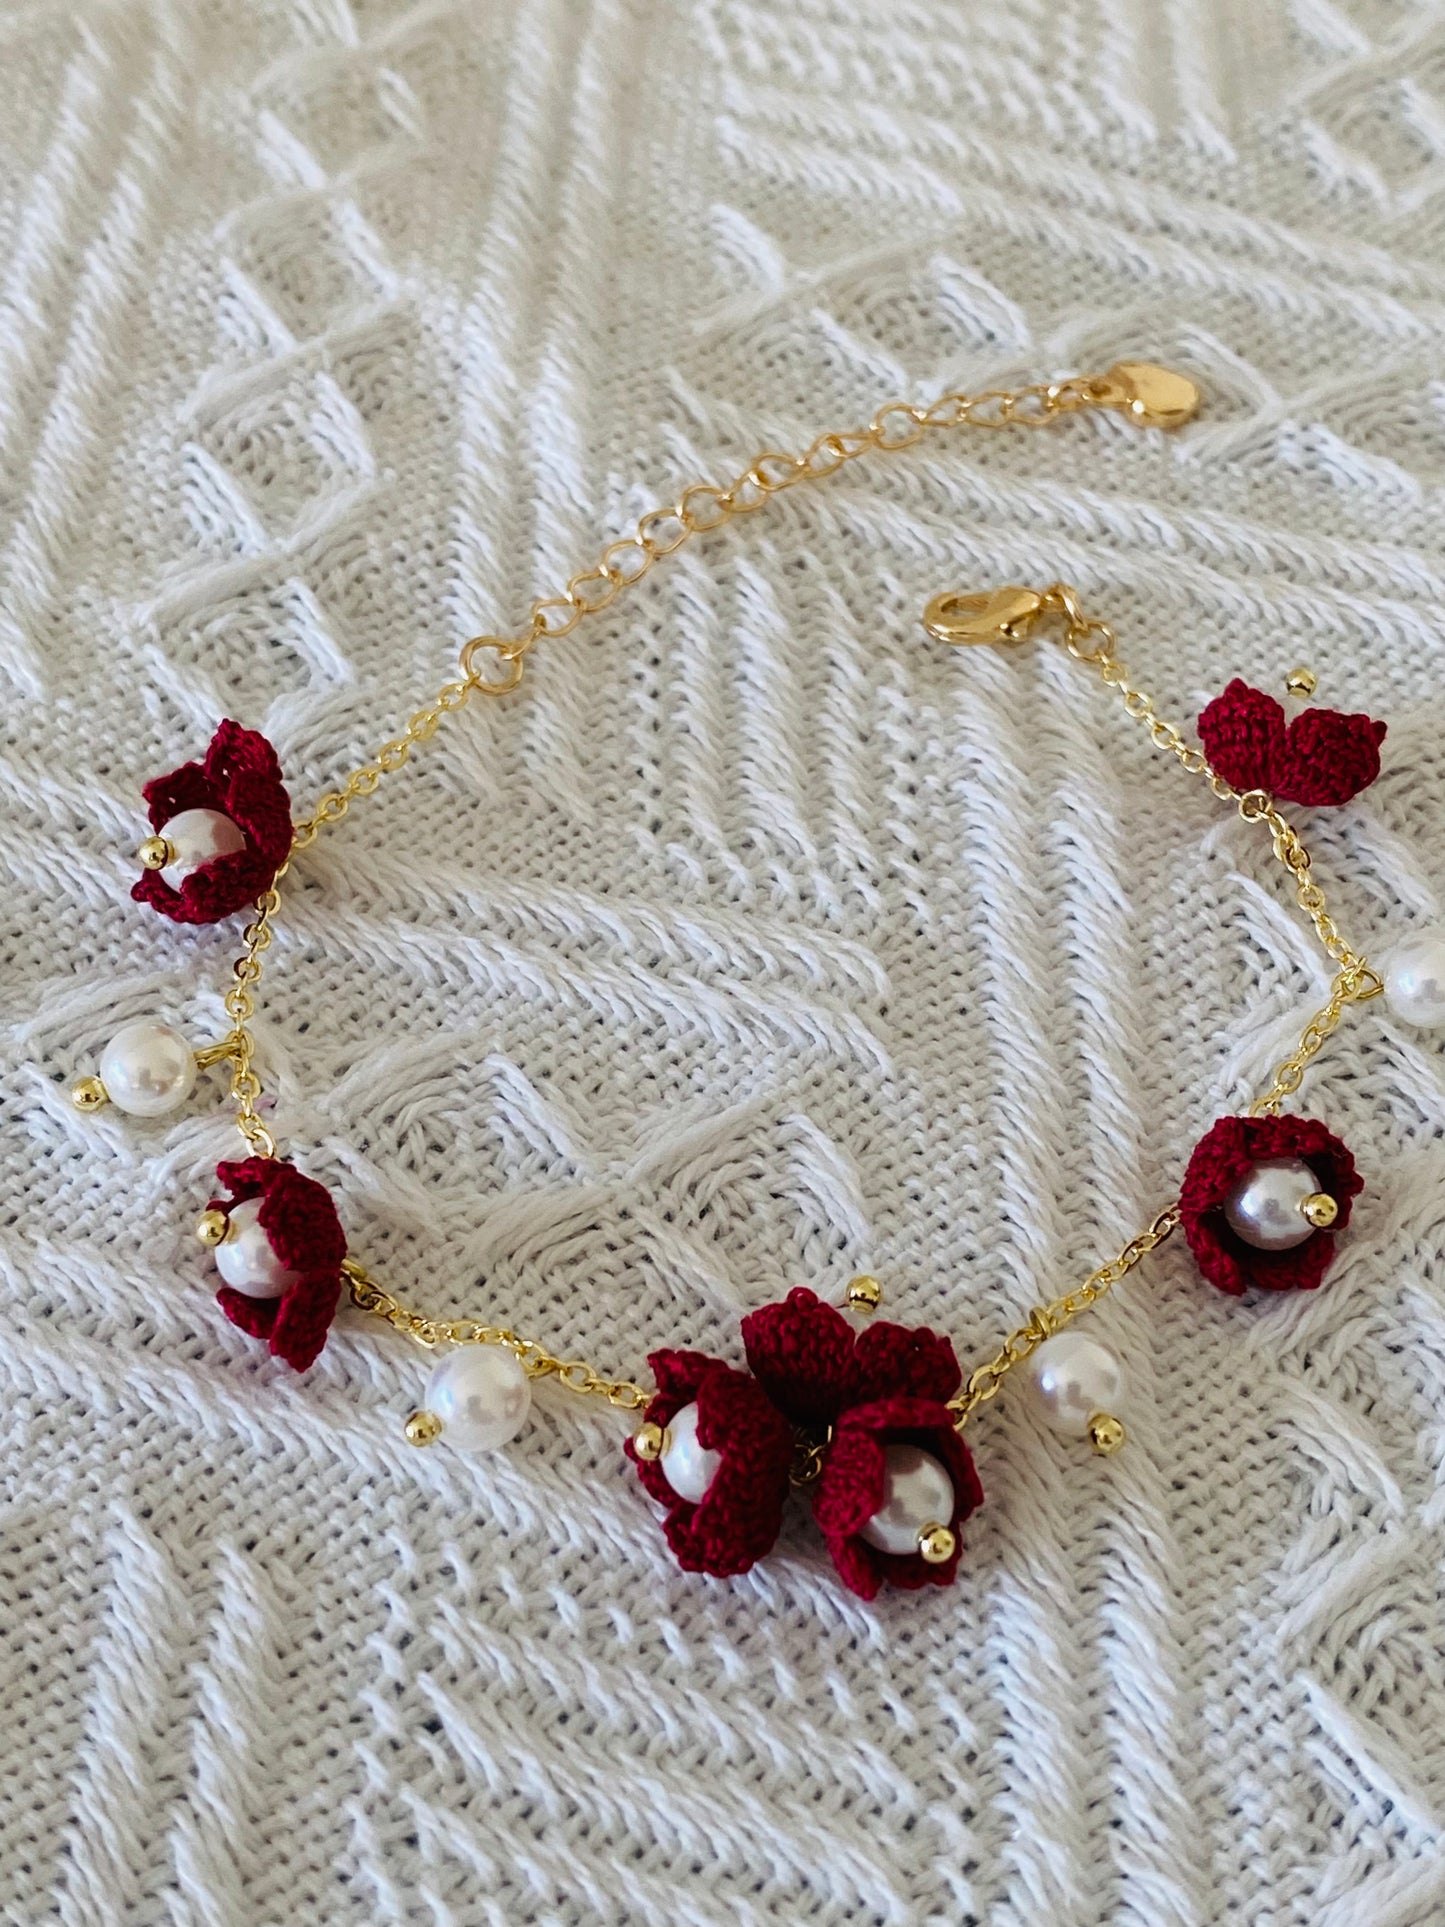 Micro Crochet Bracelet  |  Lily of the Valley Flowers